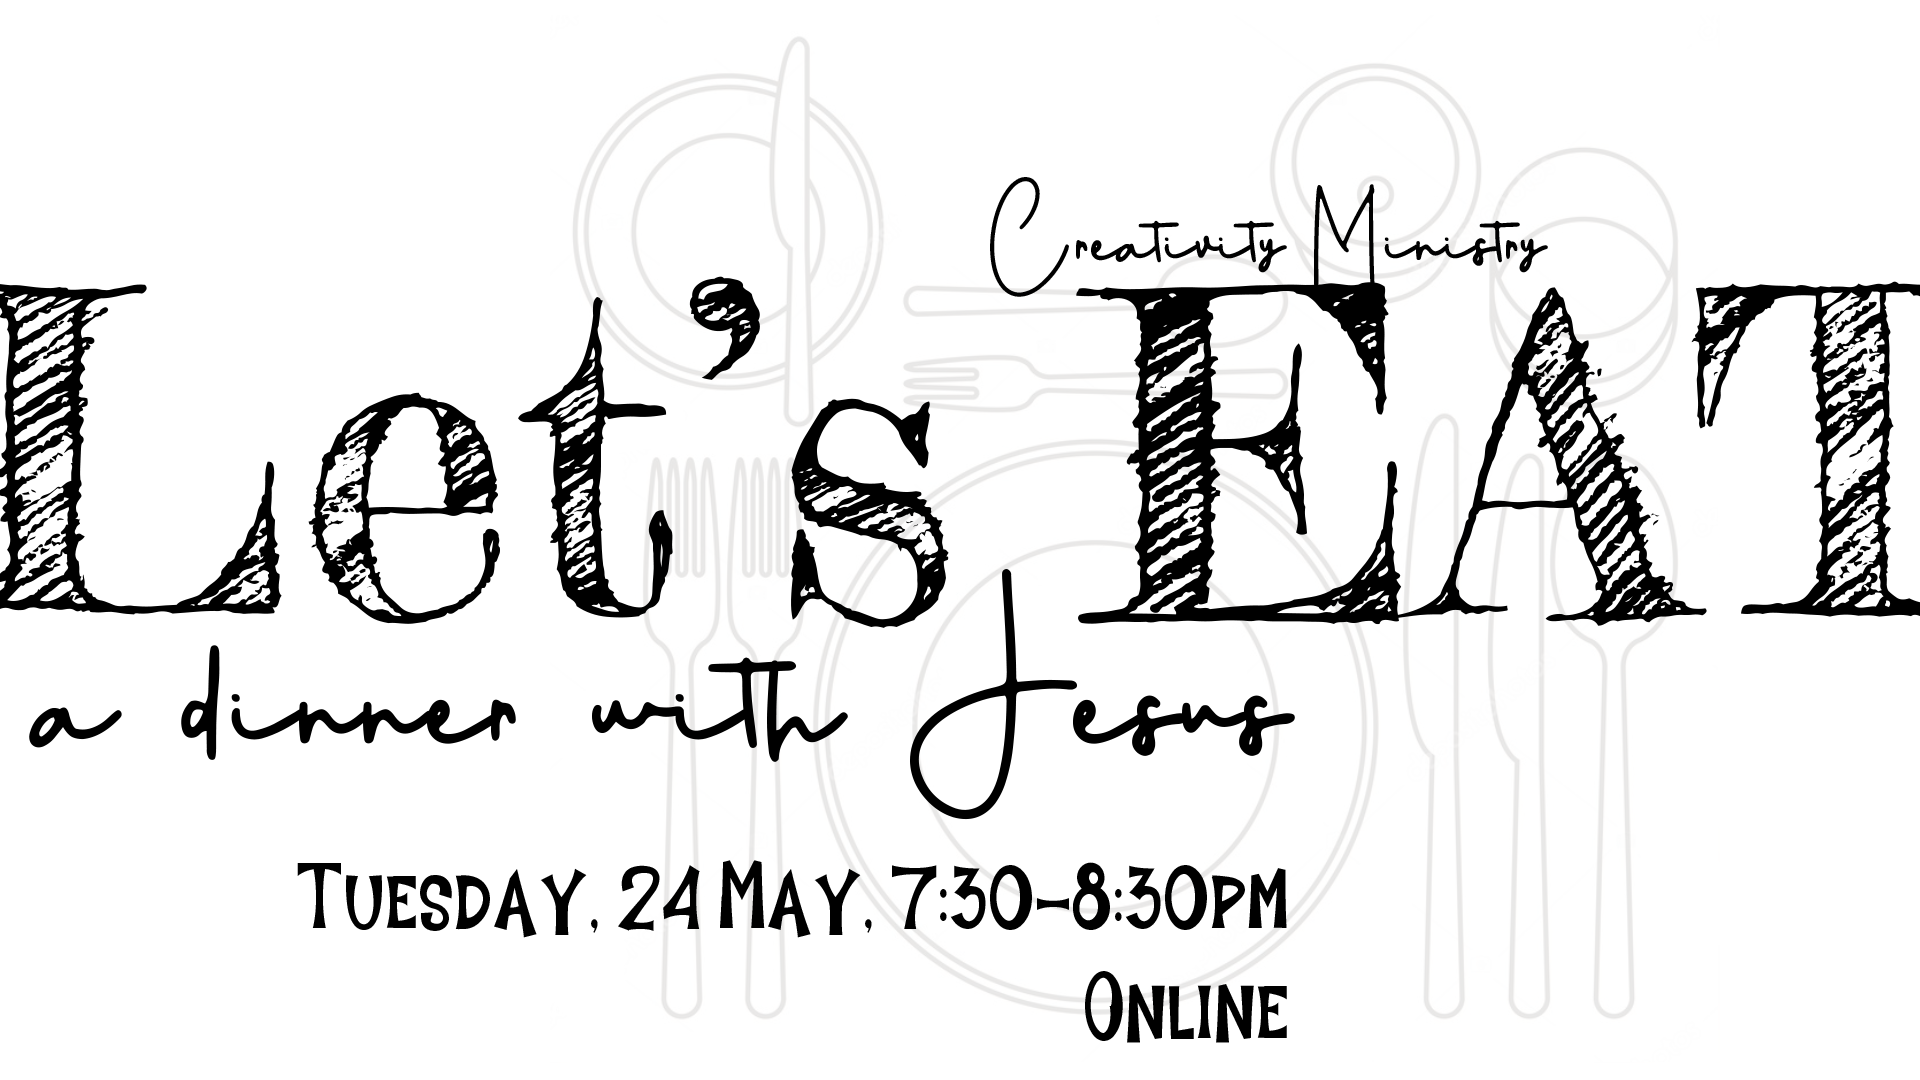 Let's EAT - Creativity Ministry